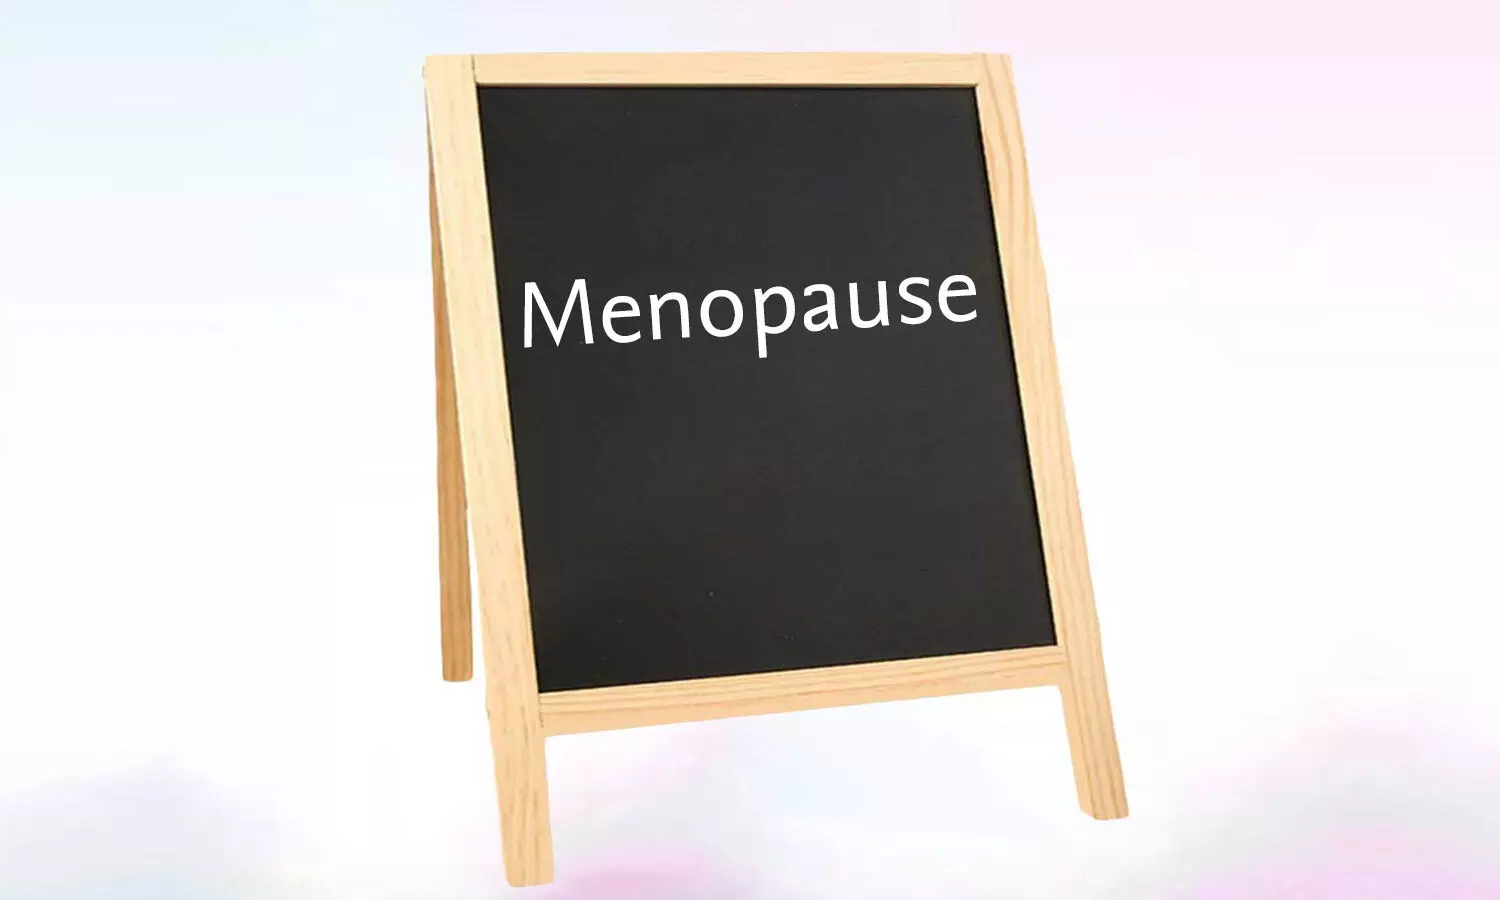 Exposure to certain industrial chemicals tied to early menopause